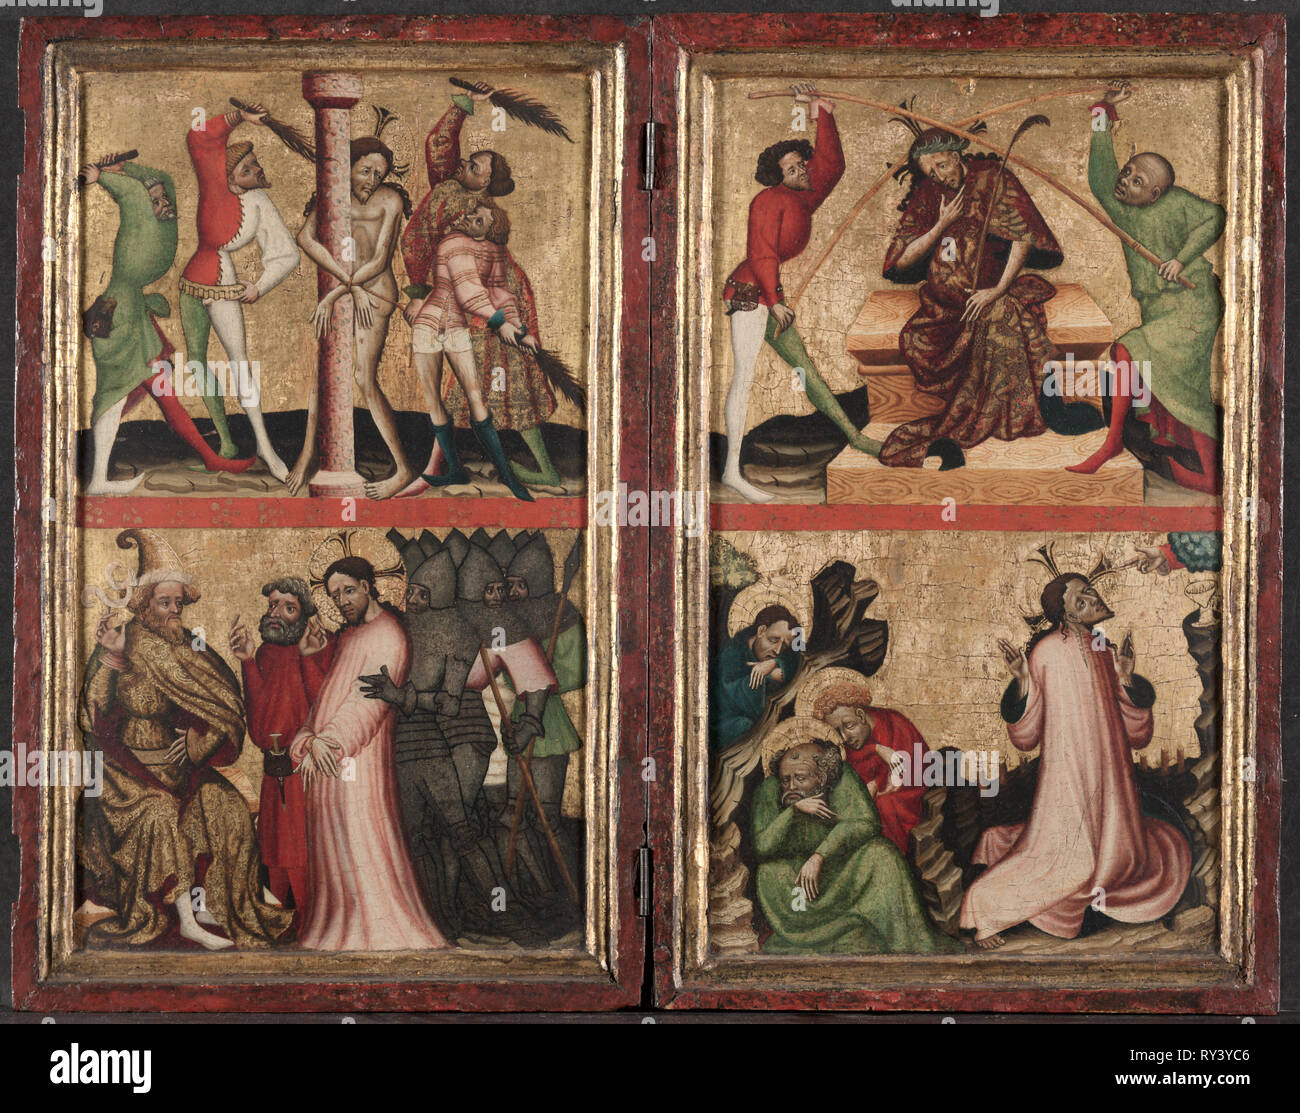 Diptych with the Passion of Christ, c. 1400. Austria, Styria, 15th century. Tempera and gold on wood oak; unframed: 45.7 x 27 cm (18 x 10 5/8 in.); including original molding: 52.4 x 34.3 cm (20 5/8 x 13 1/2 in Stock Photo